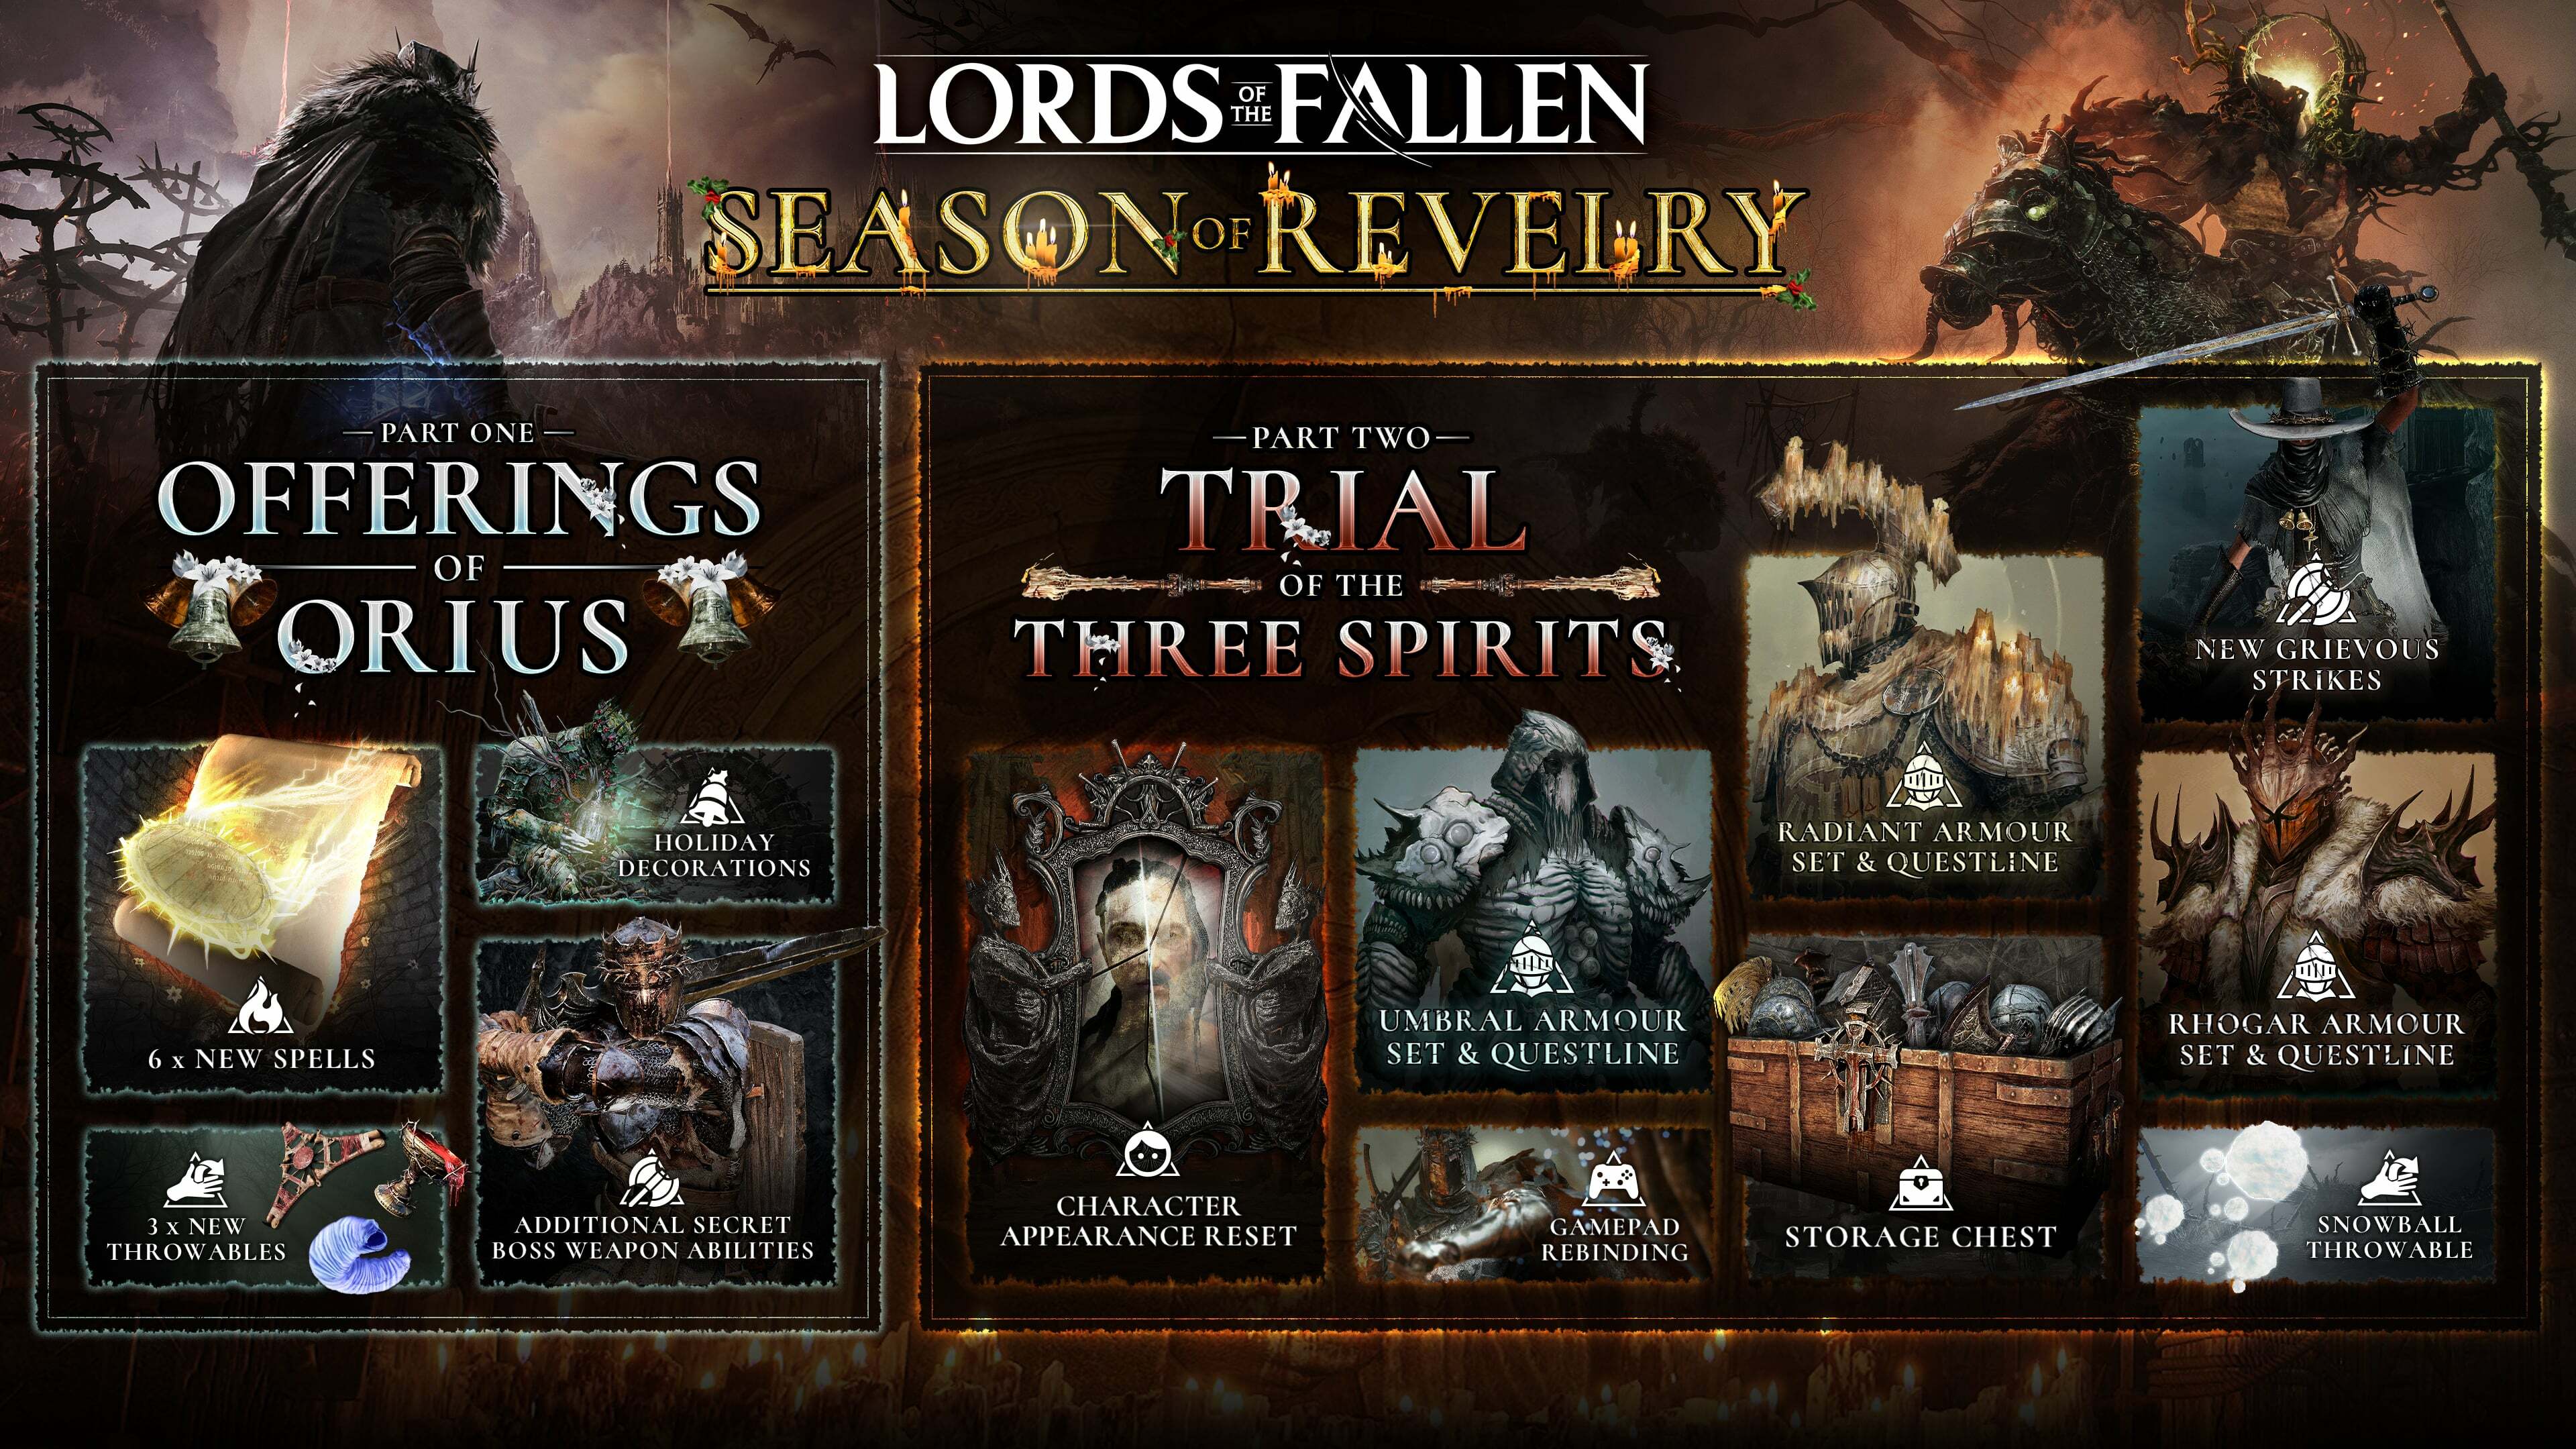 LORDS OF THE FALLEN on X: Update v.1.1.292 is now live on all